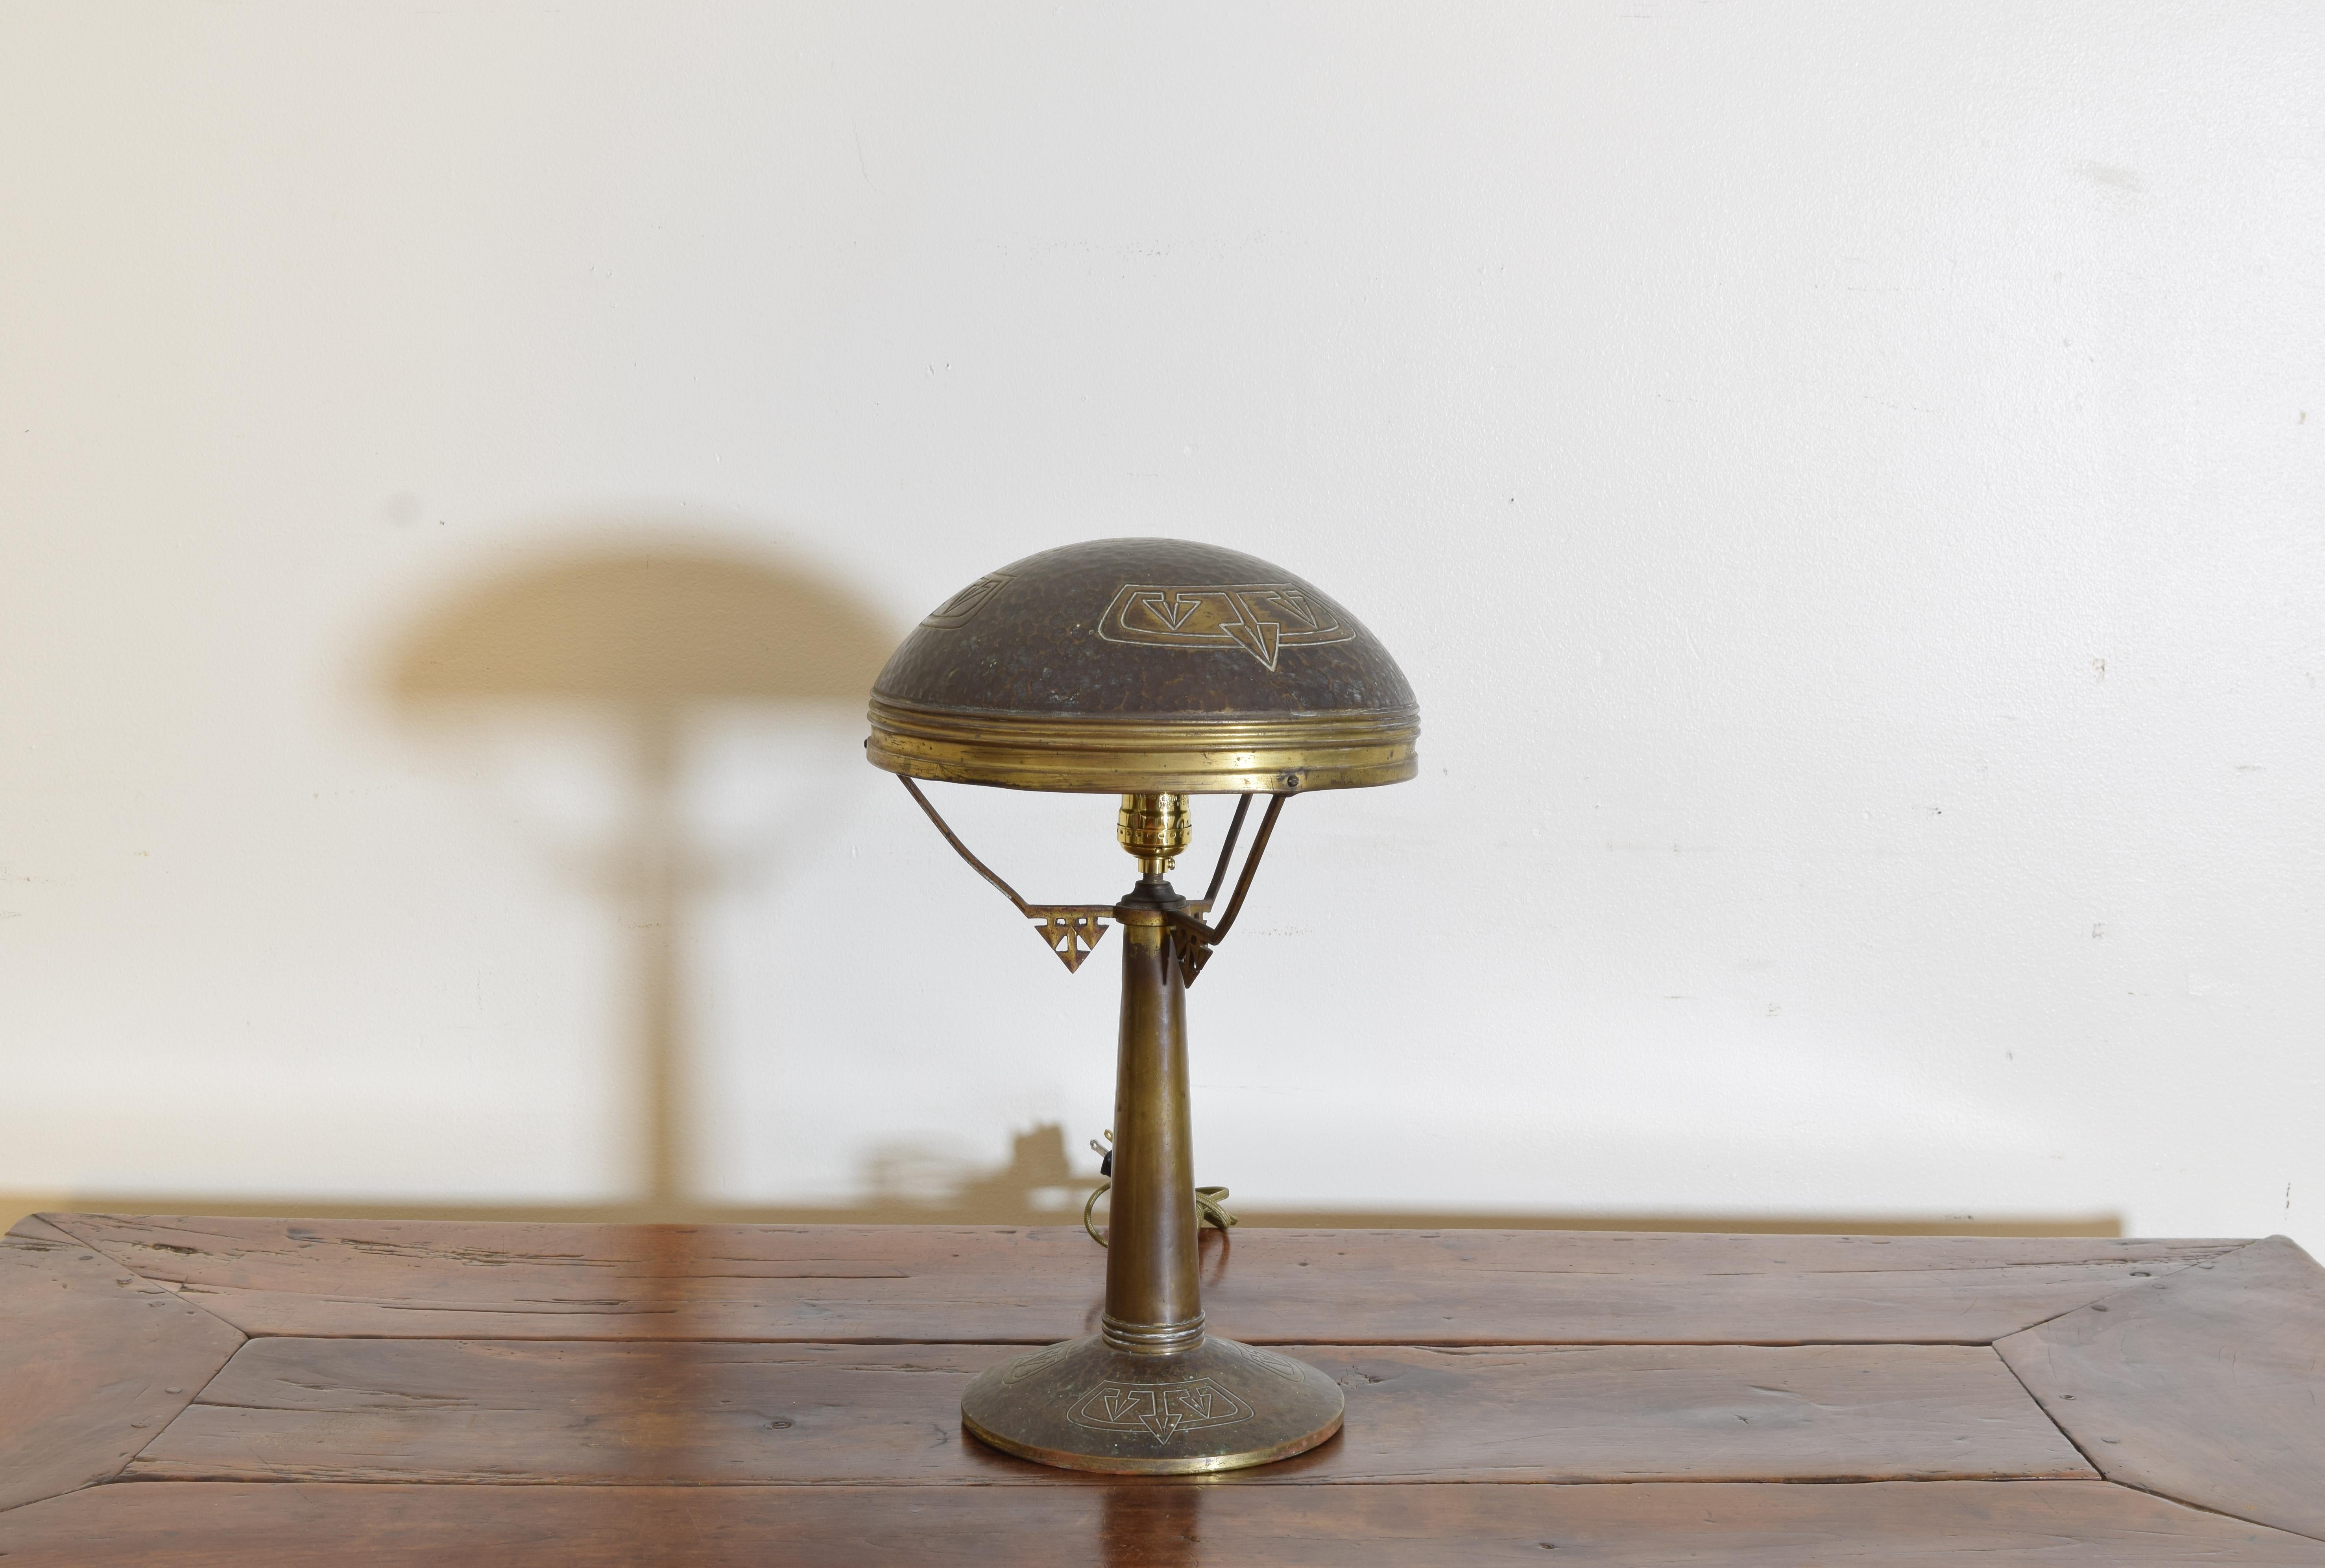 Having a domed shade with a decorative design raised on a tapering standard with geometric stretchers atop a disk-form base